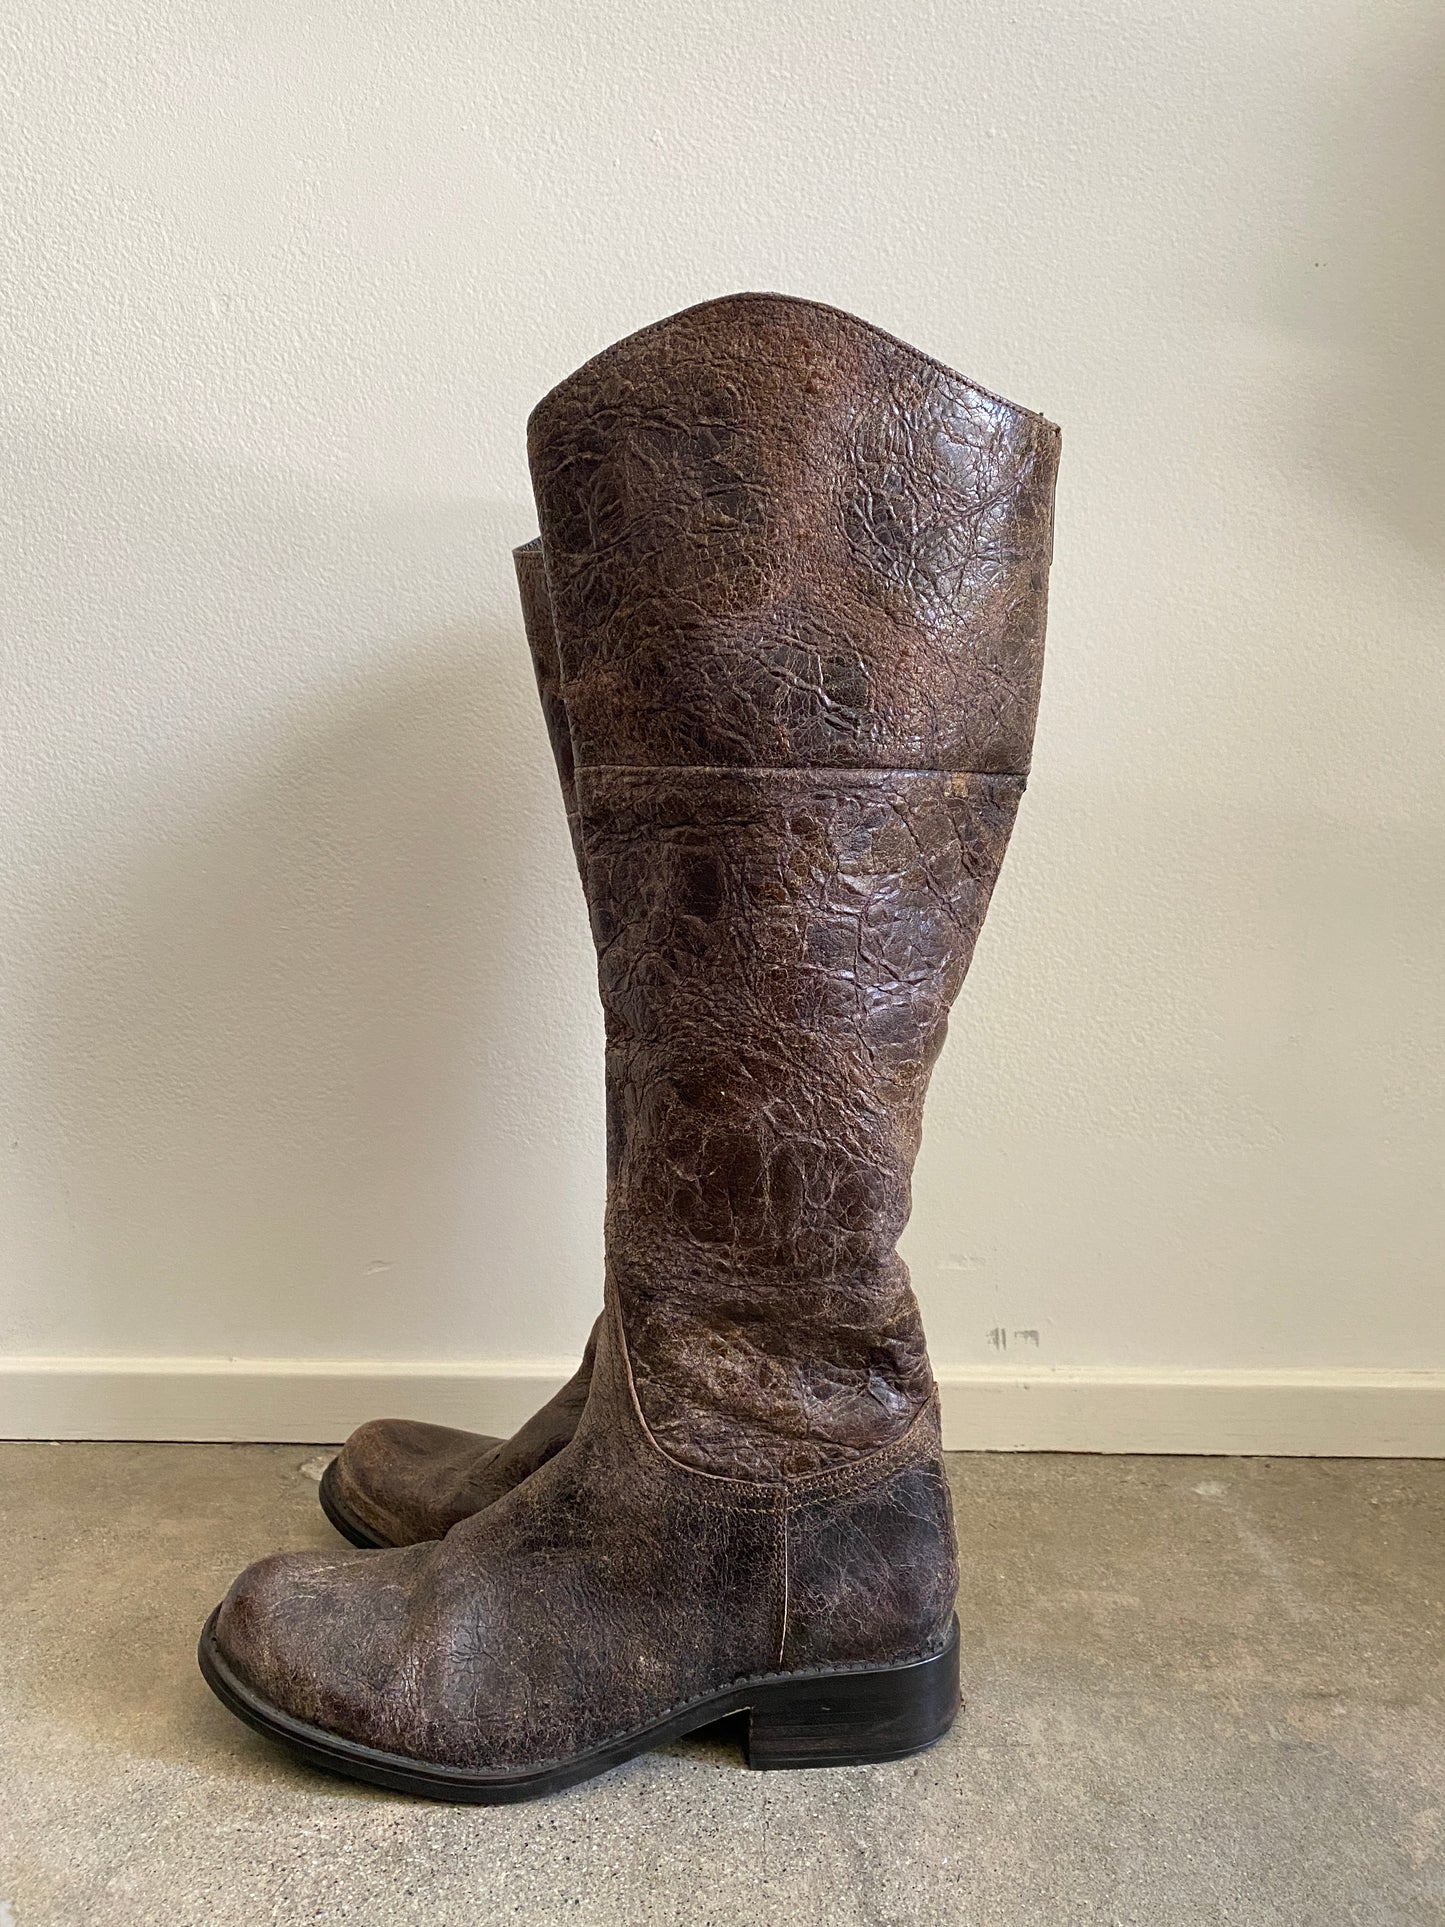 00's Steve Madden Brown Distressed Riding Boots